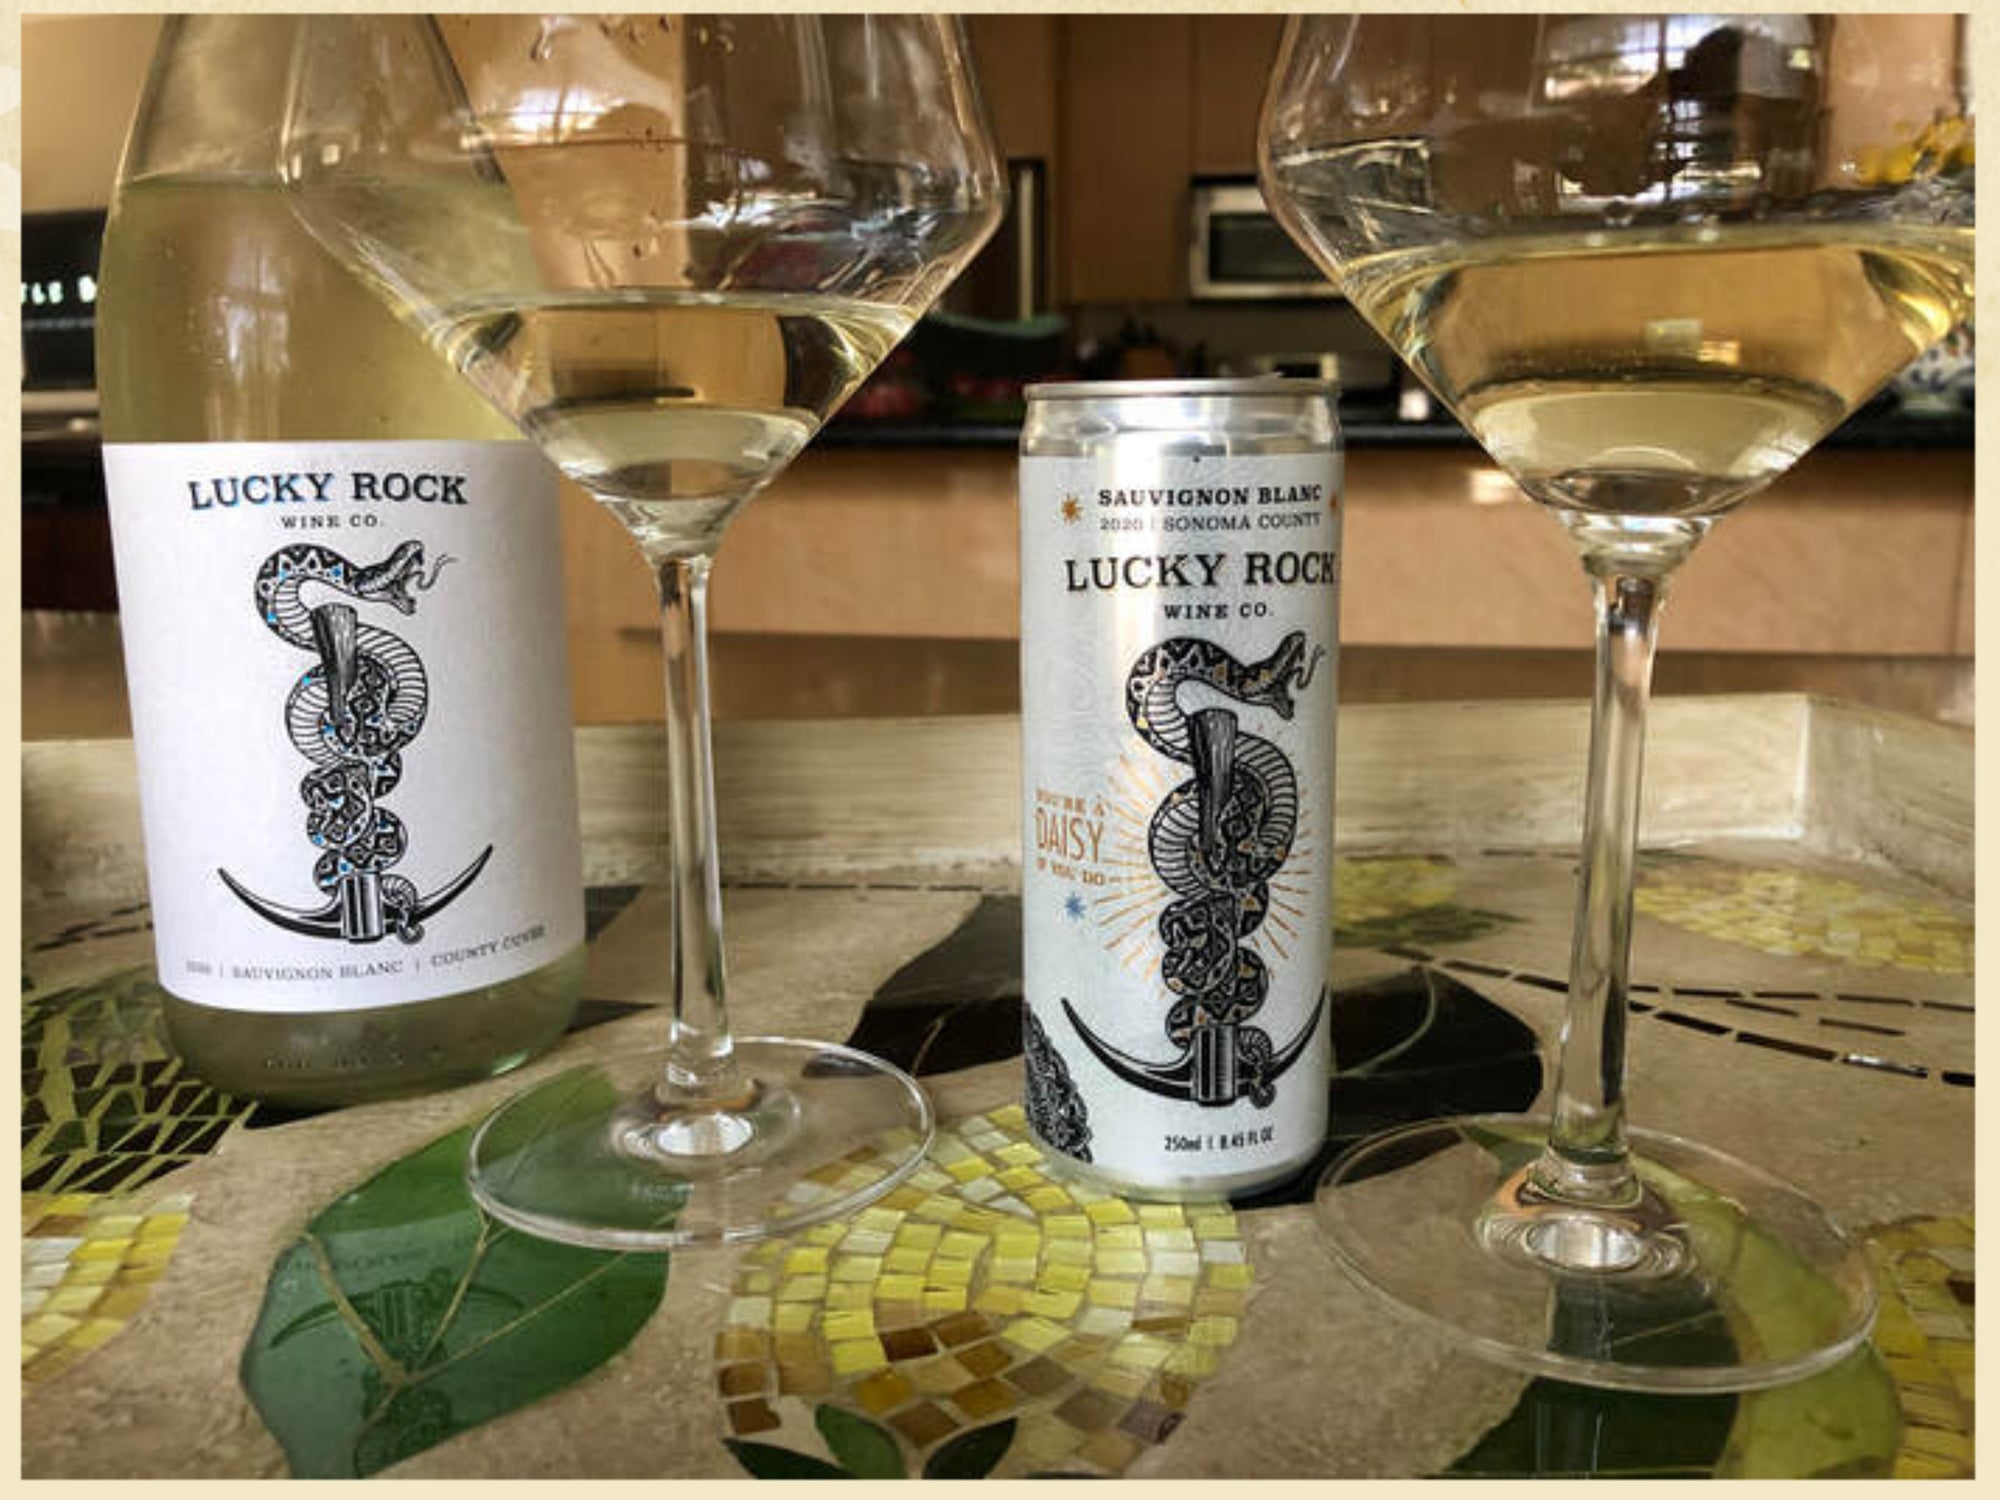 Wine Along The 101 Review: 2020 Sauvignon Blanc aka "Changing Minds on Canned Wine"